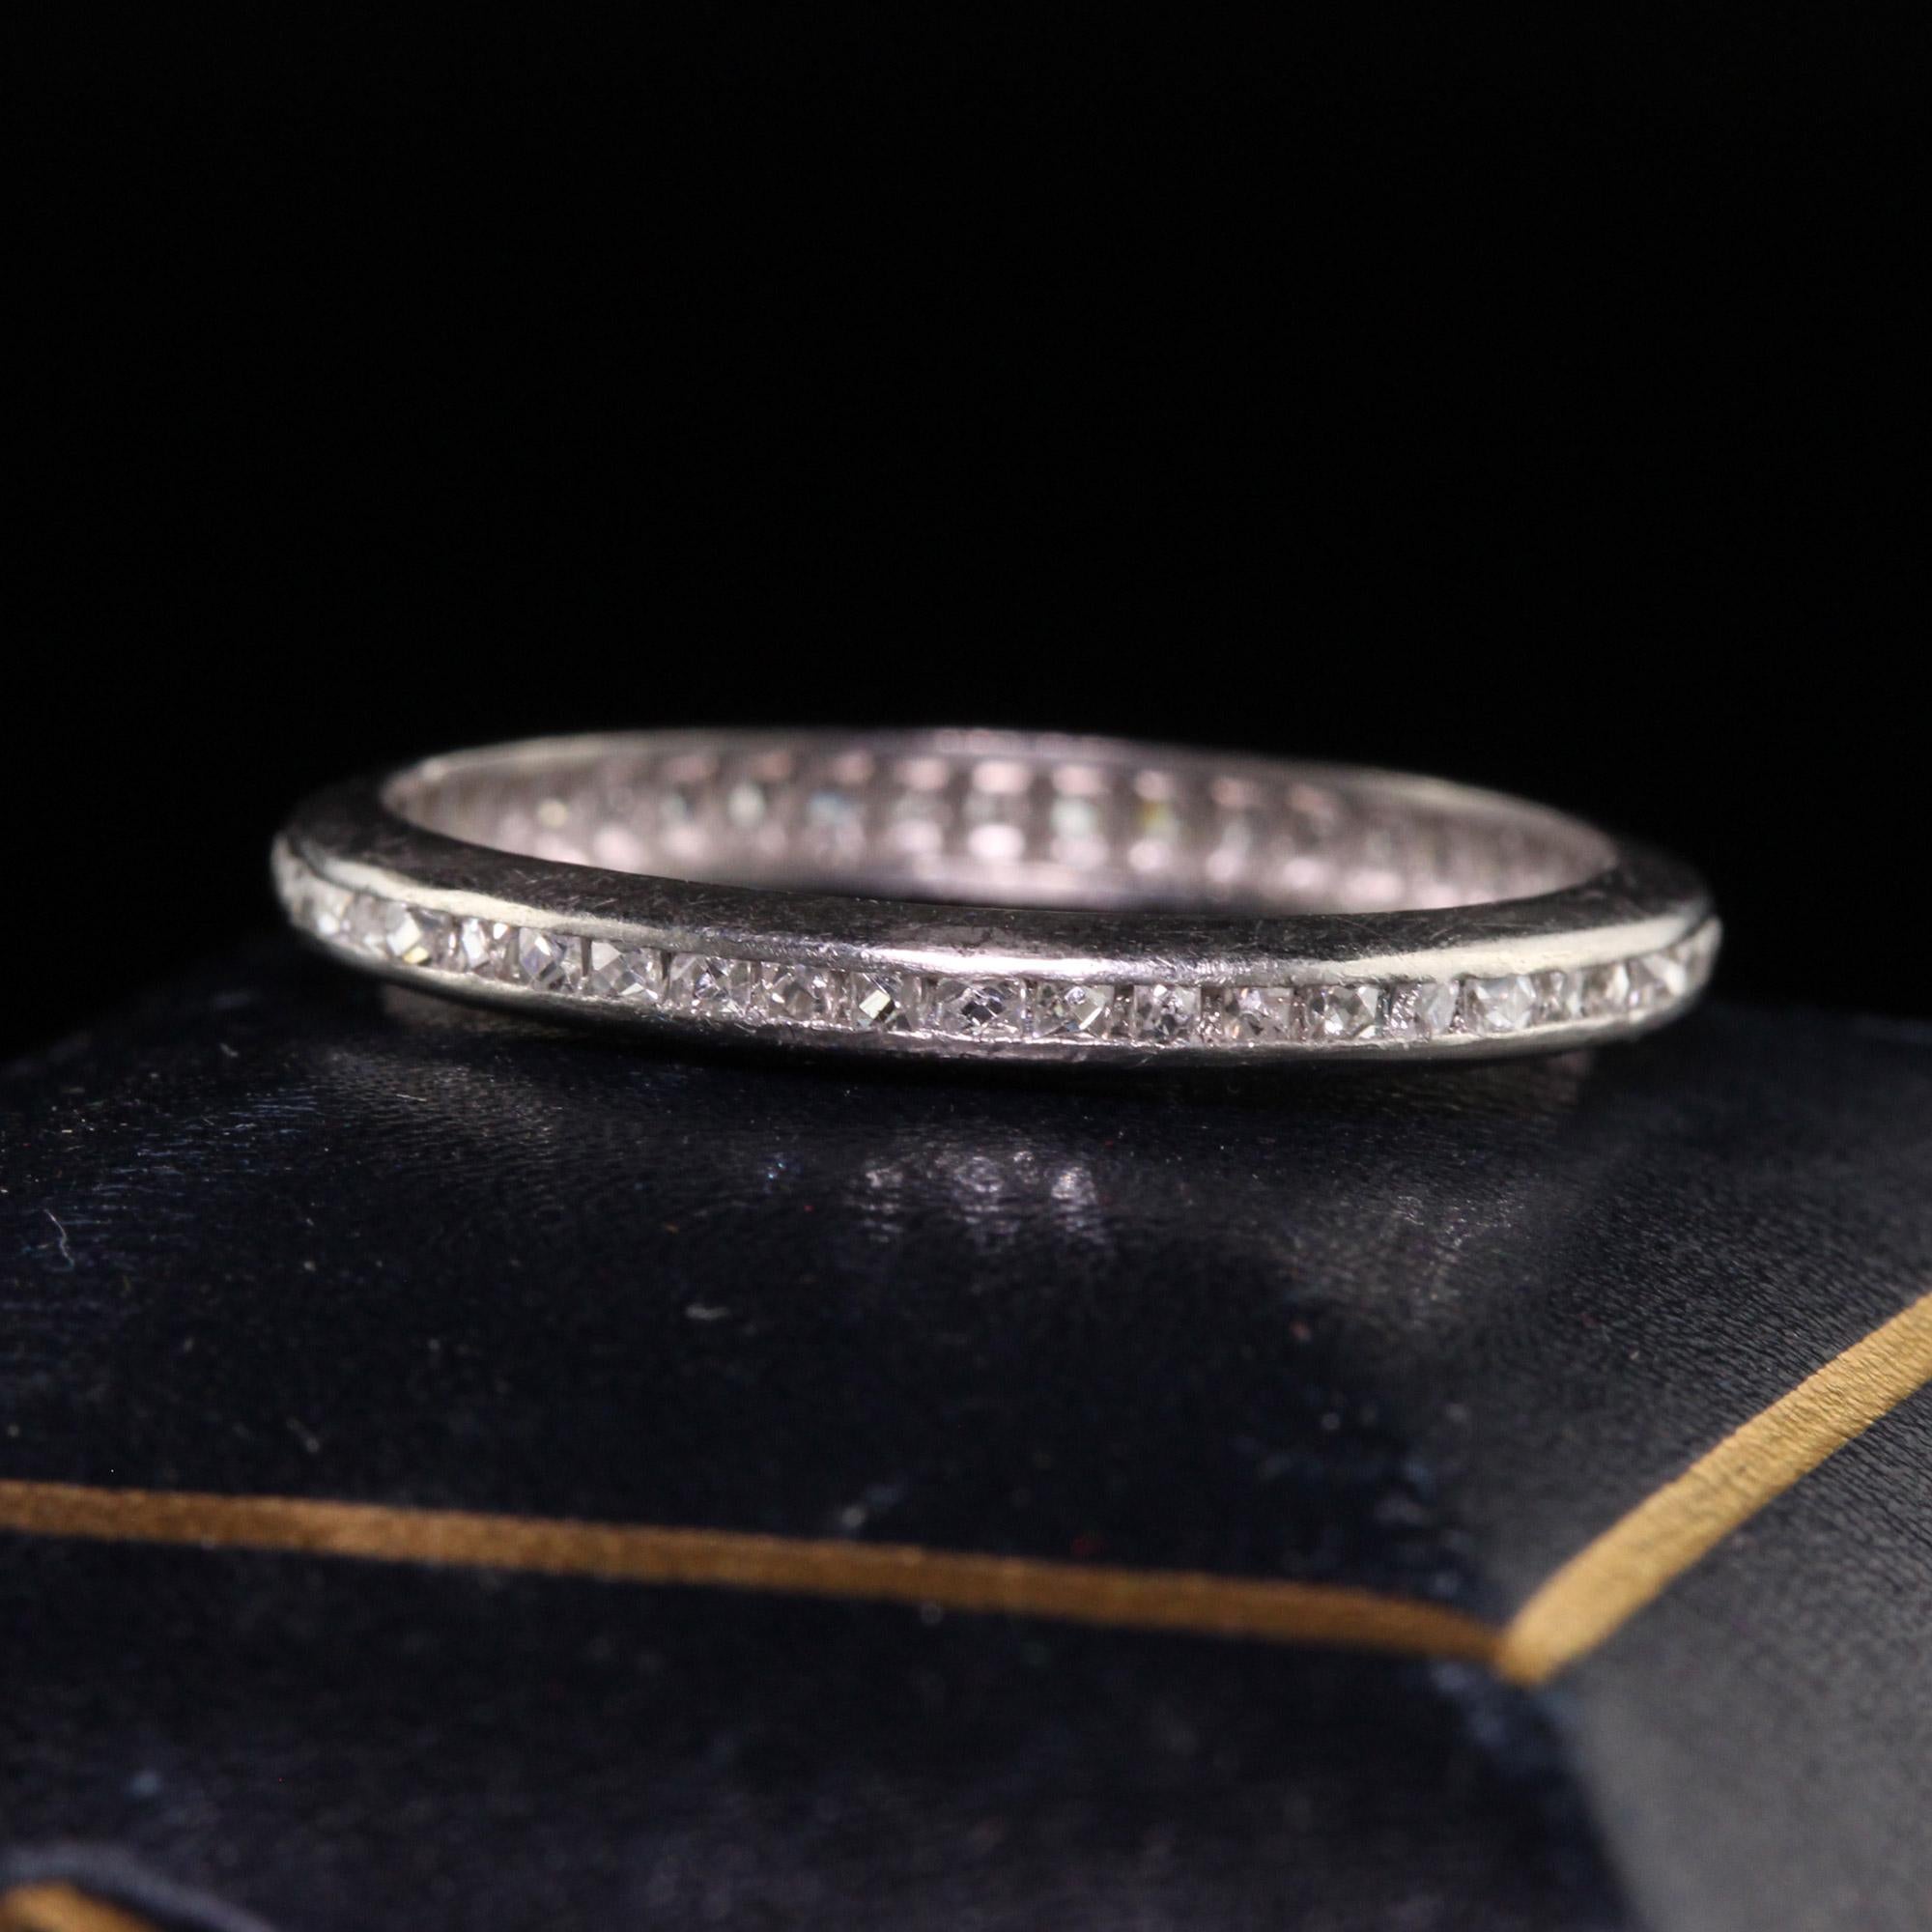 Beautiful Antique Art Deco Platinum French Cut Diamond Eternity Band - Size 5 1/4. This gorgeous wedding band is crafted in platinum. There are small French cut diamonds going around the entire ring and is a rare find to see such small French cuts